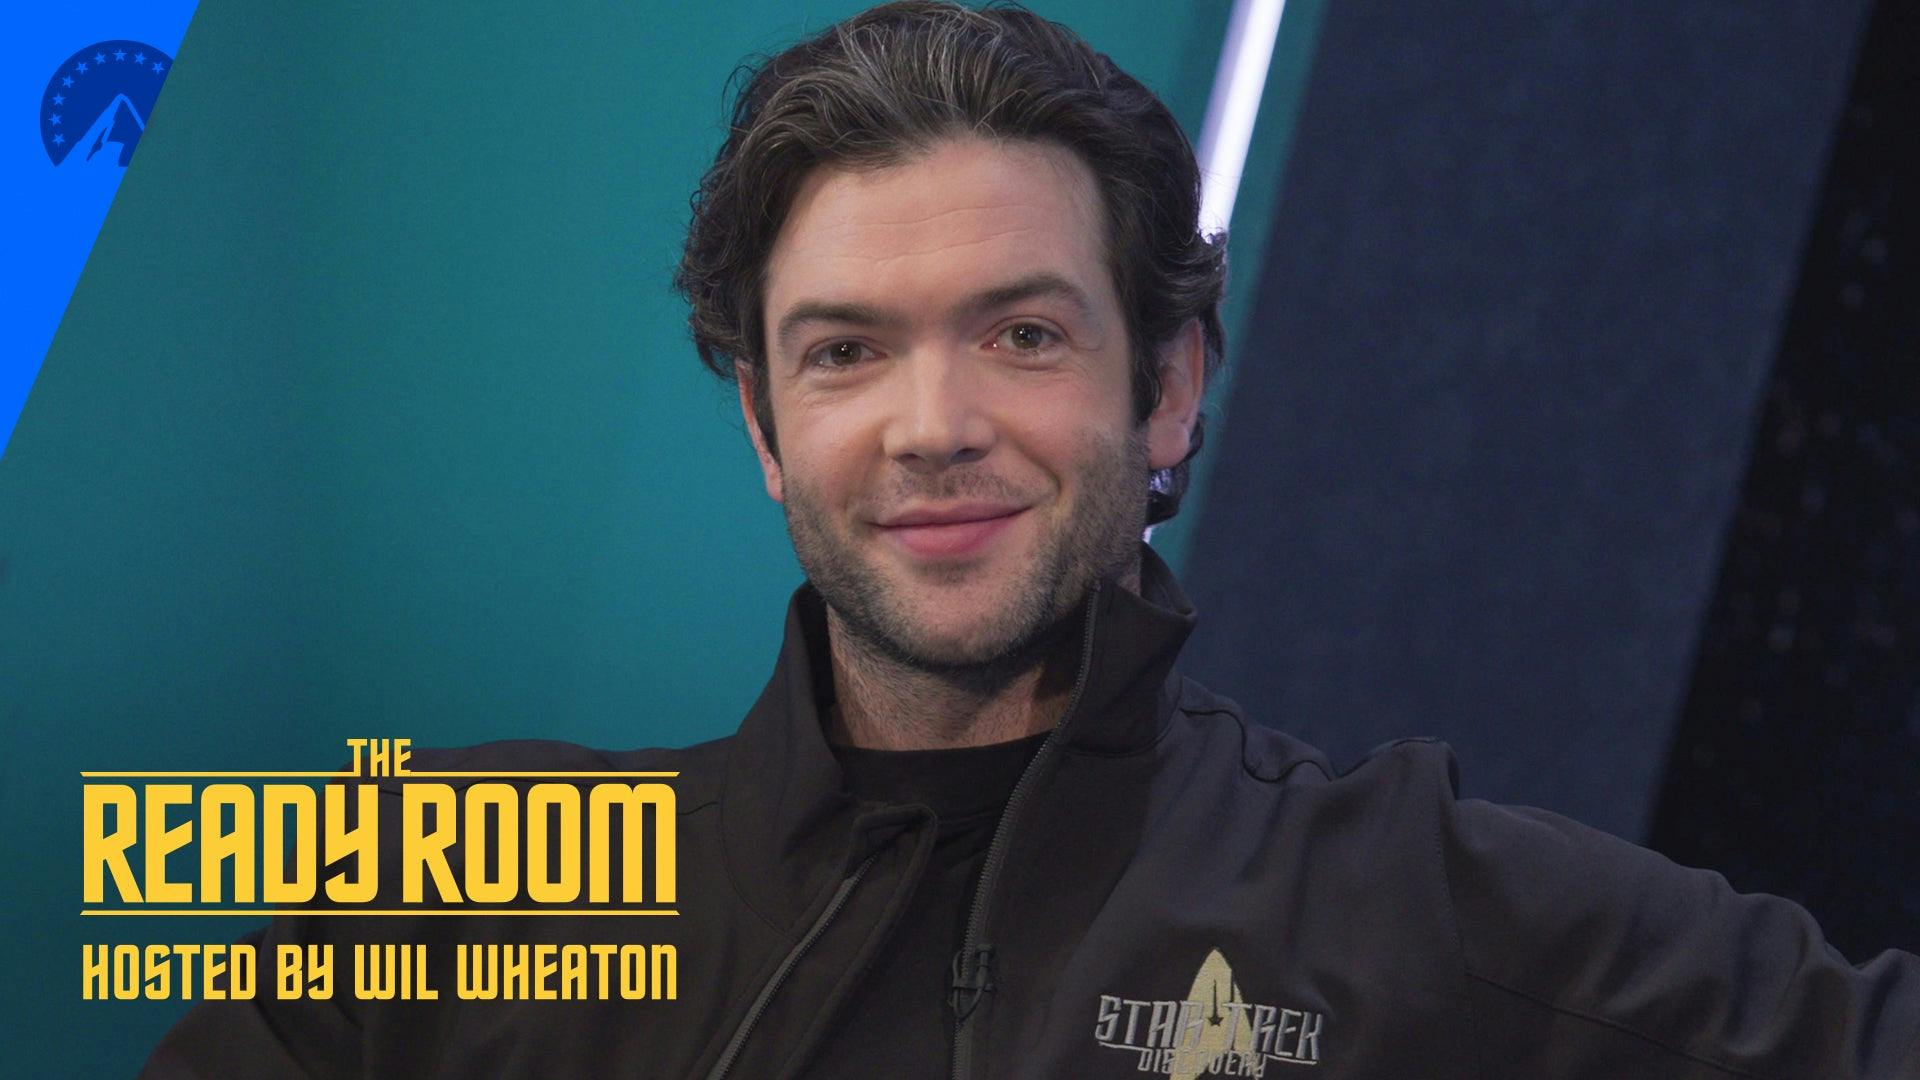 The Ready Room set with a smiling Ethan Peck